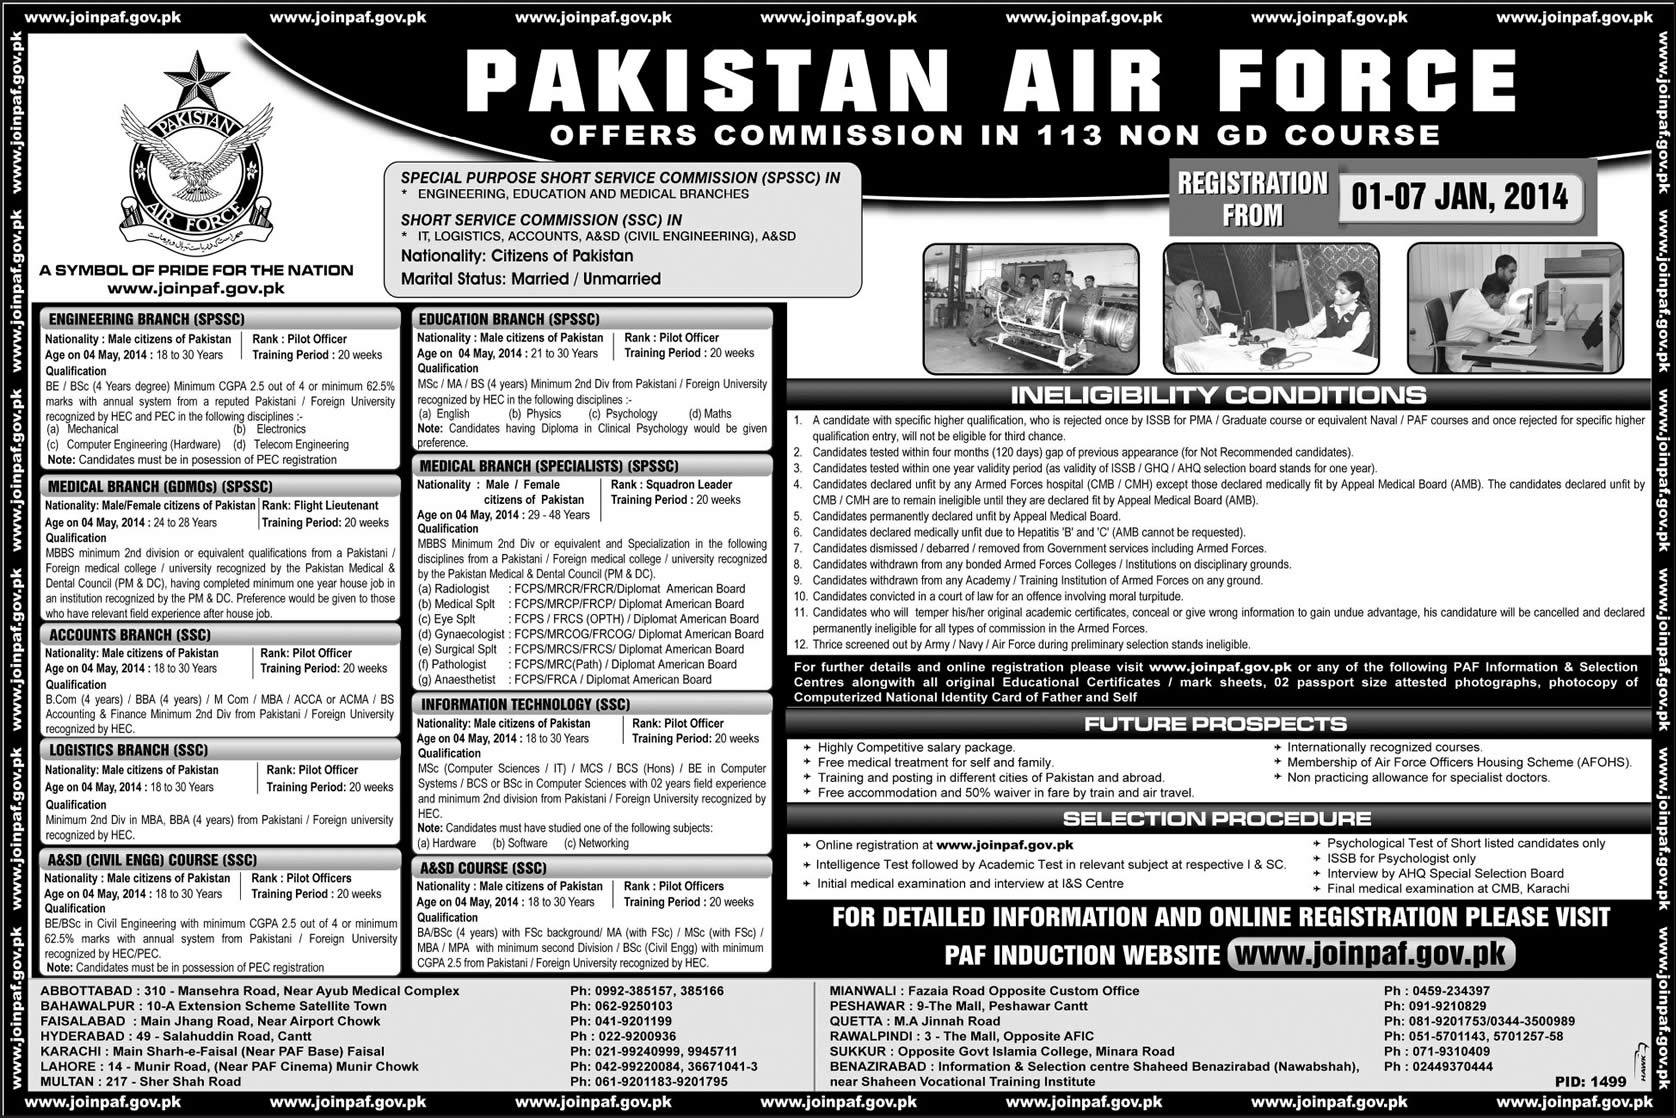 Pakistan Air Force Online Registration January 2014 for Commission in 113 Non GD Course